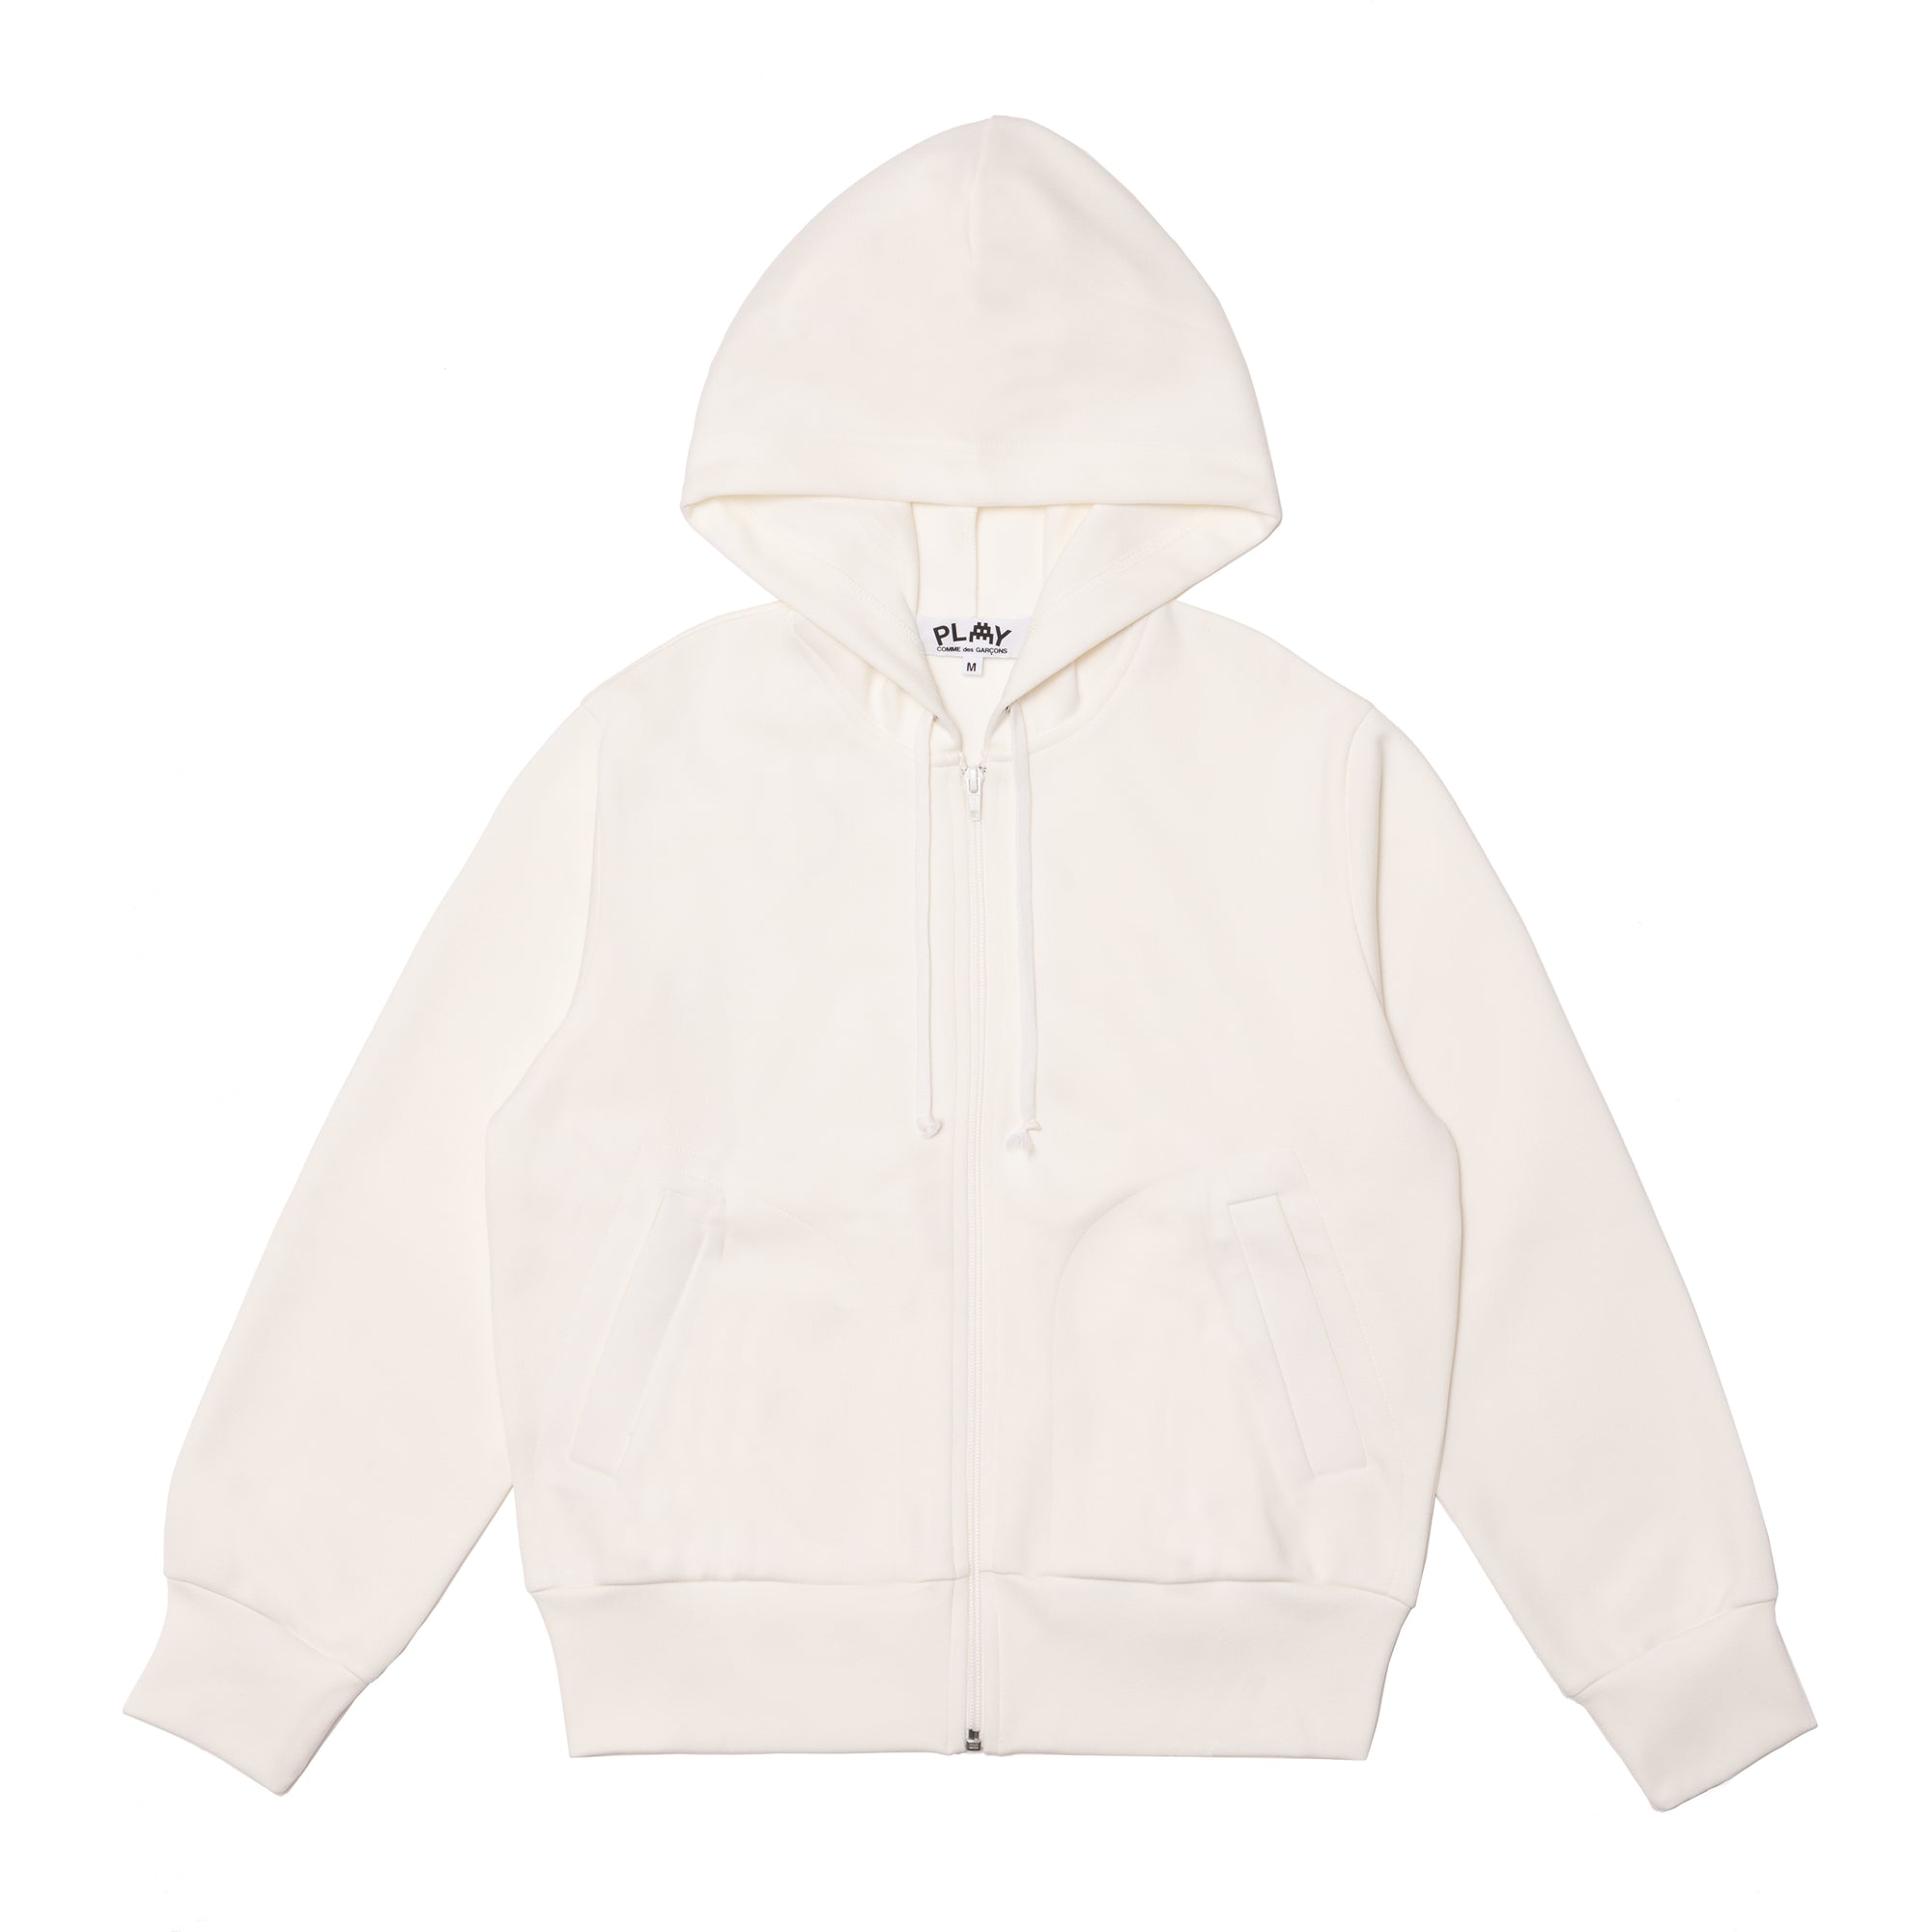 PLAY CDG - INVADER Polyester Hooded Sweater - (Off White) view 2